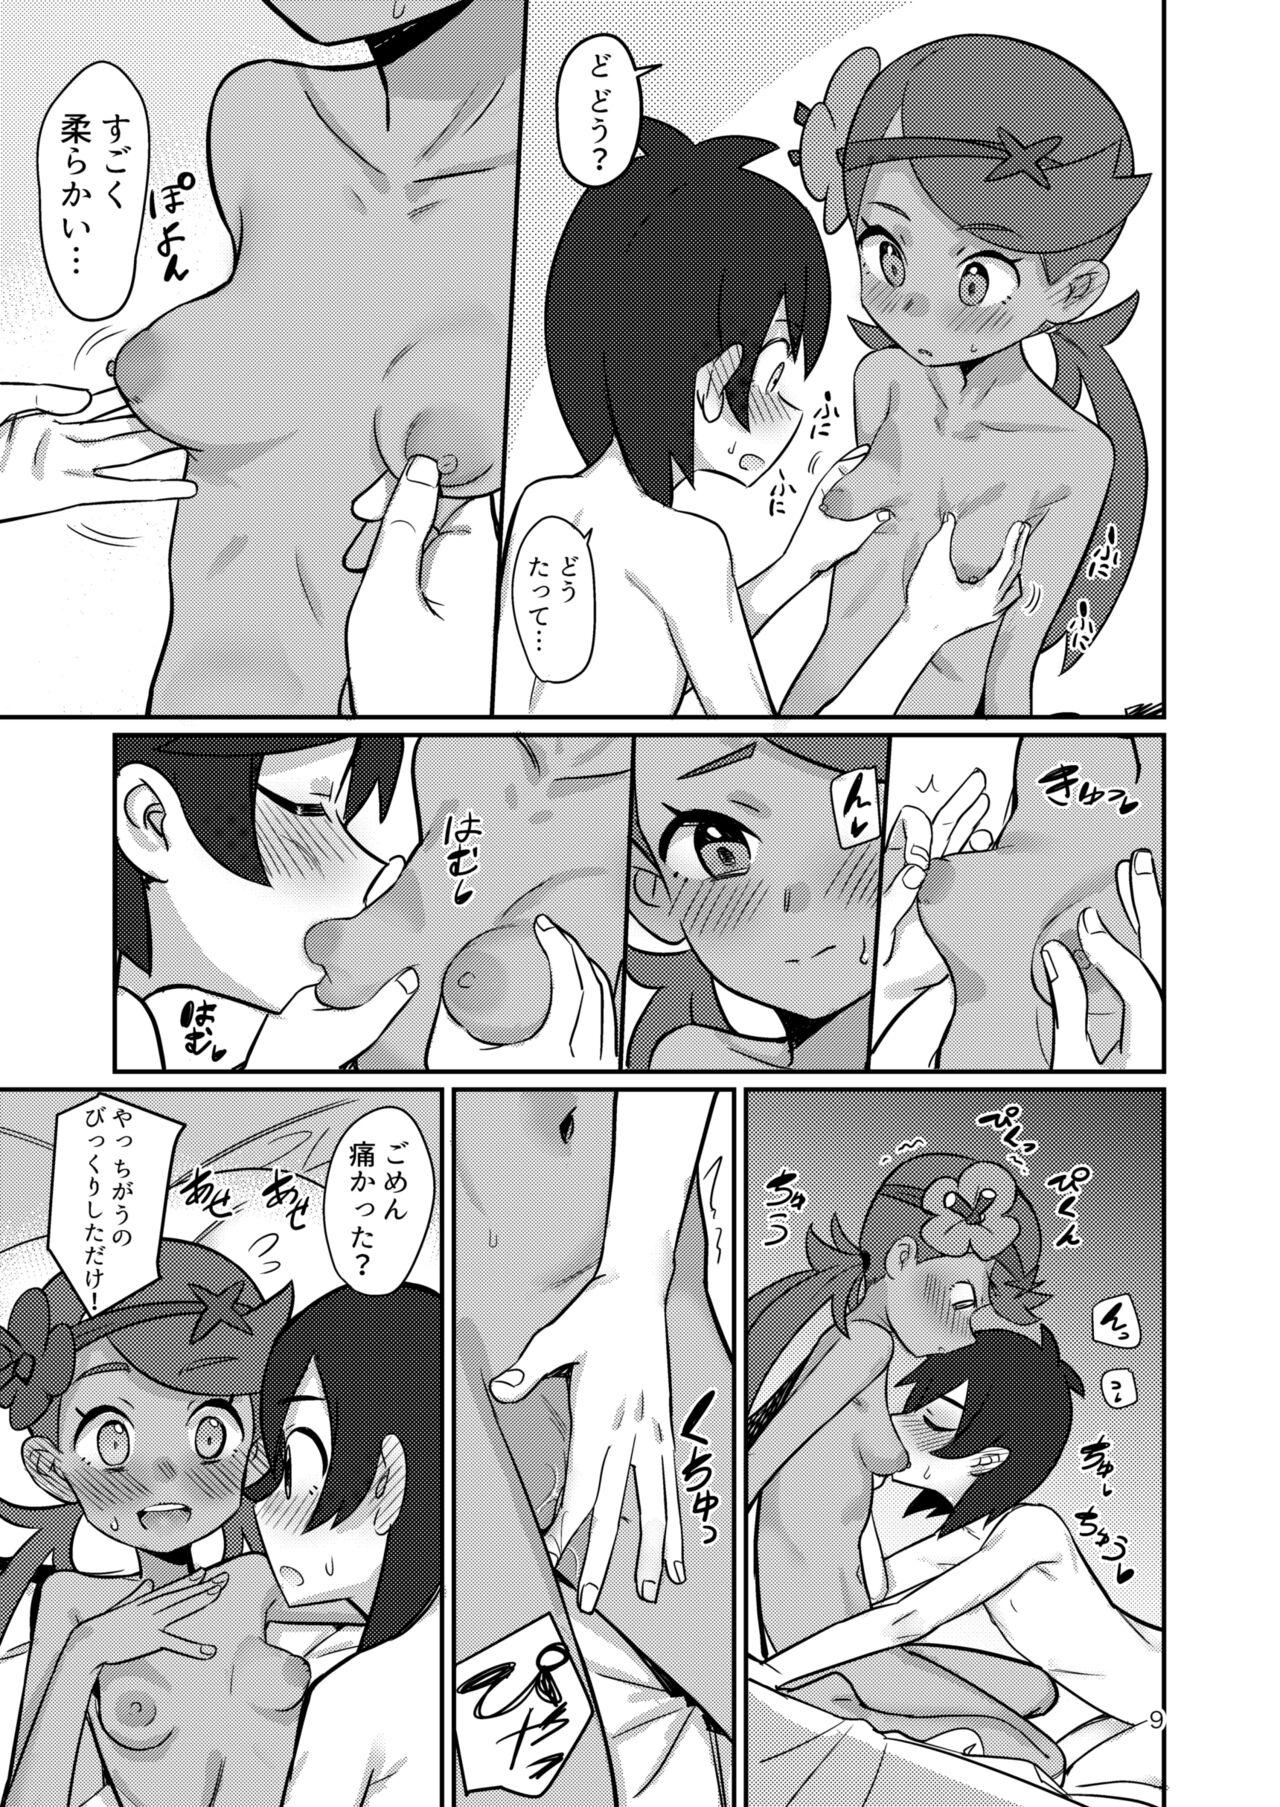 Lolicon ALOLA NIGHT - Pokemon | pocket monsters Missionary Porn - Page 8